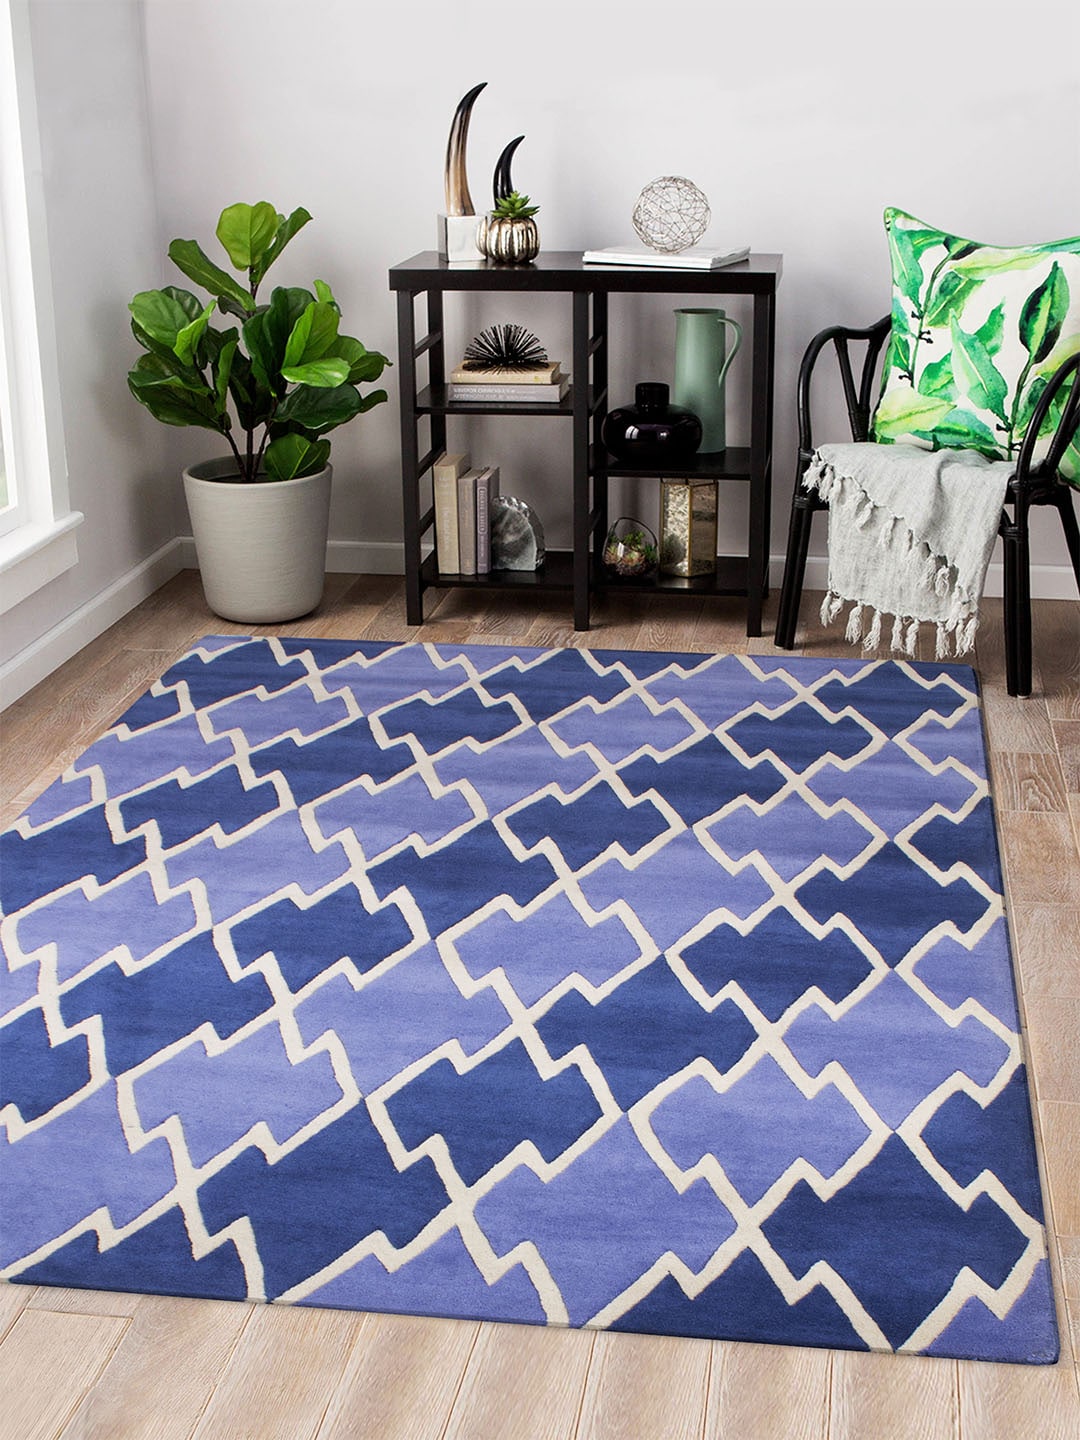 Story@home Blue GeometricPrinted Carpet Price in India